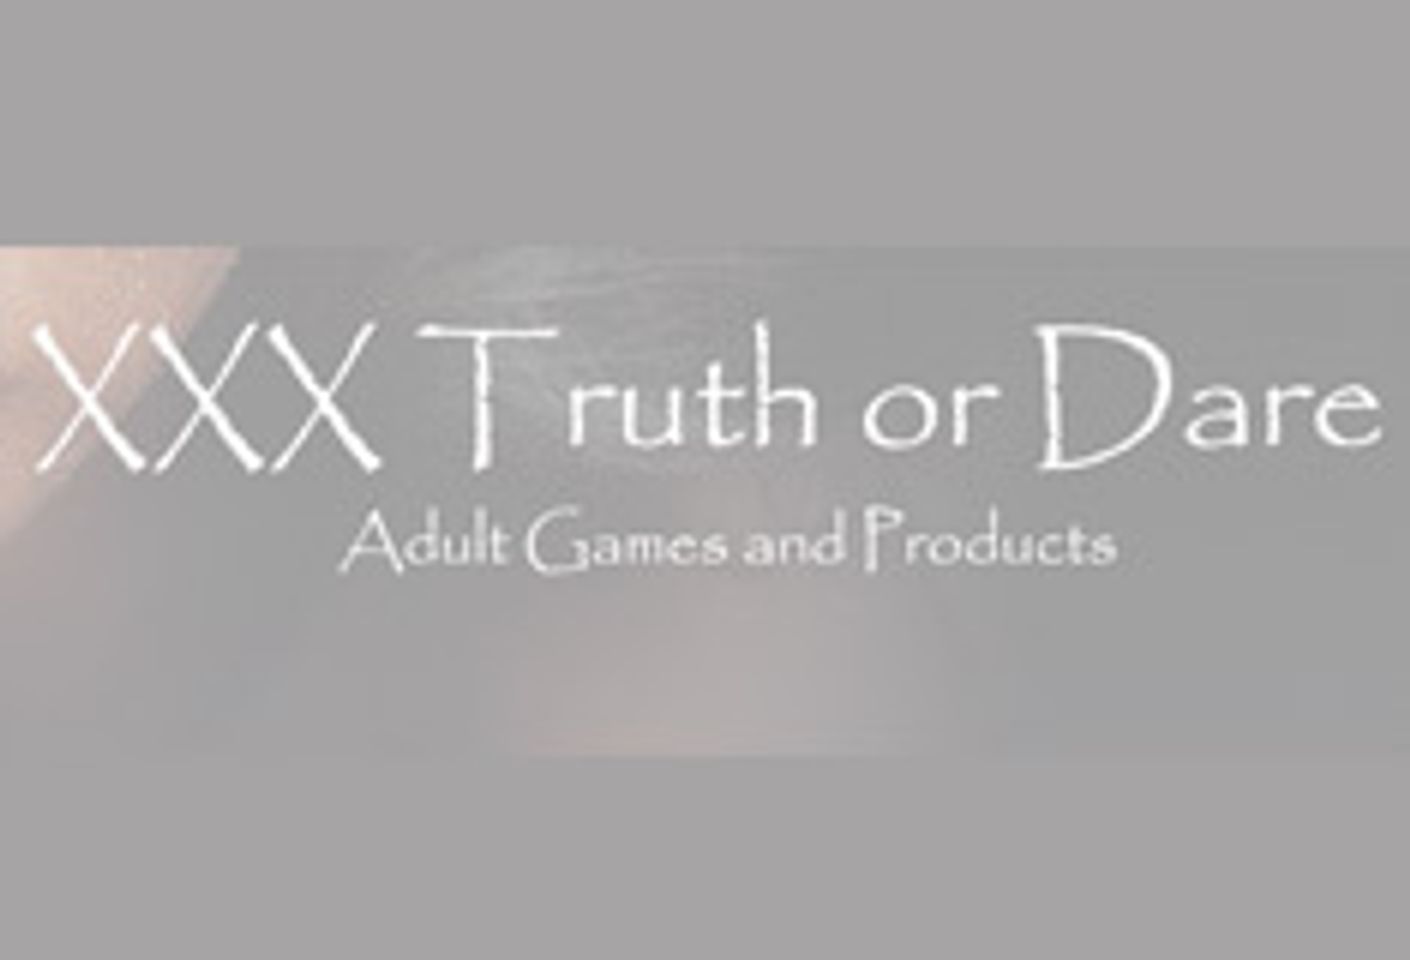 ‘XXX Truth or Dare’ Inks Canadian Distribution Deal